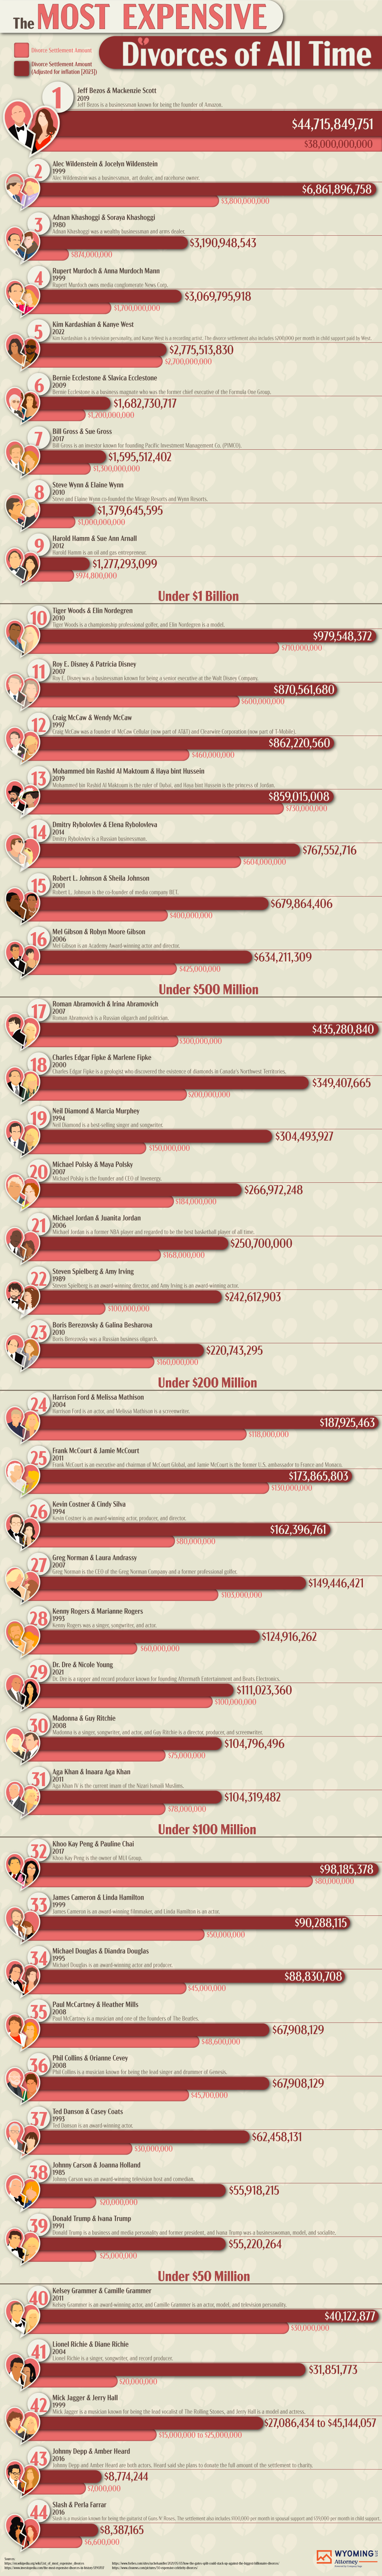 The Most Expensive Divorces of All Time